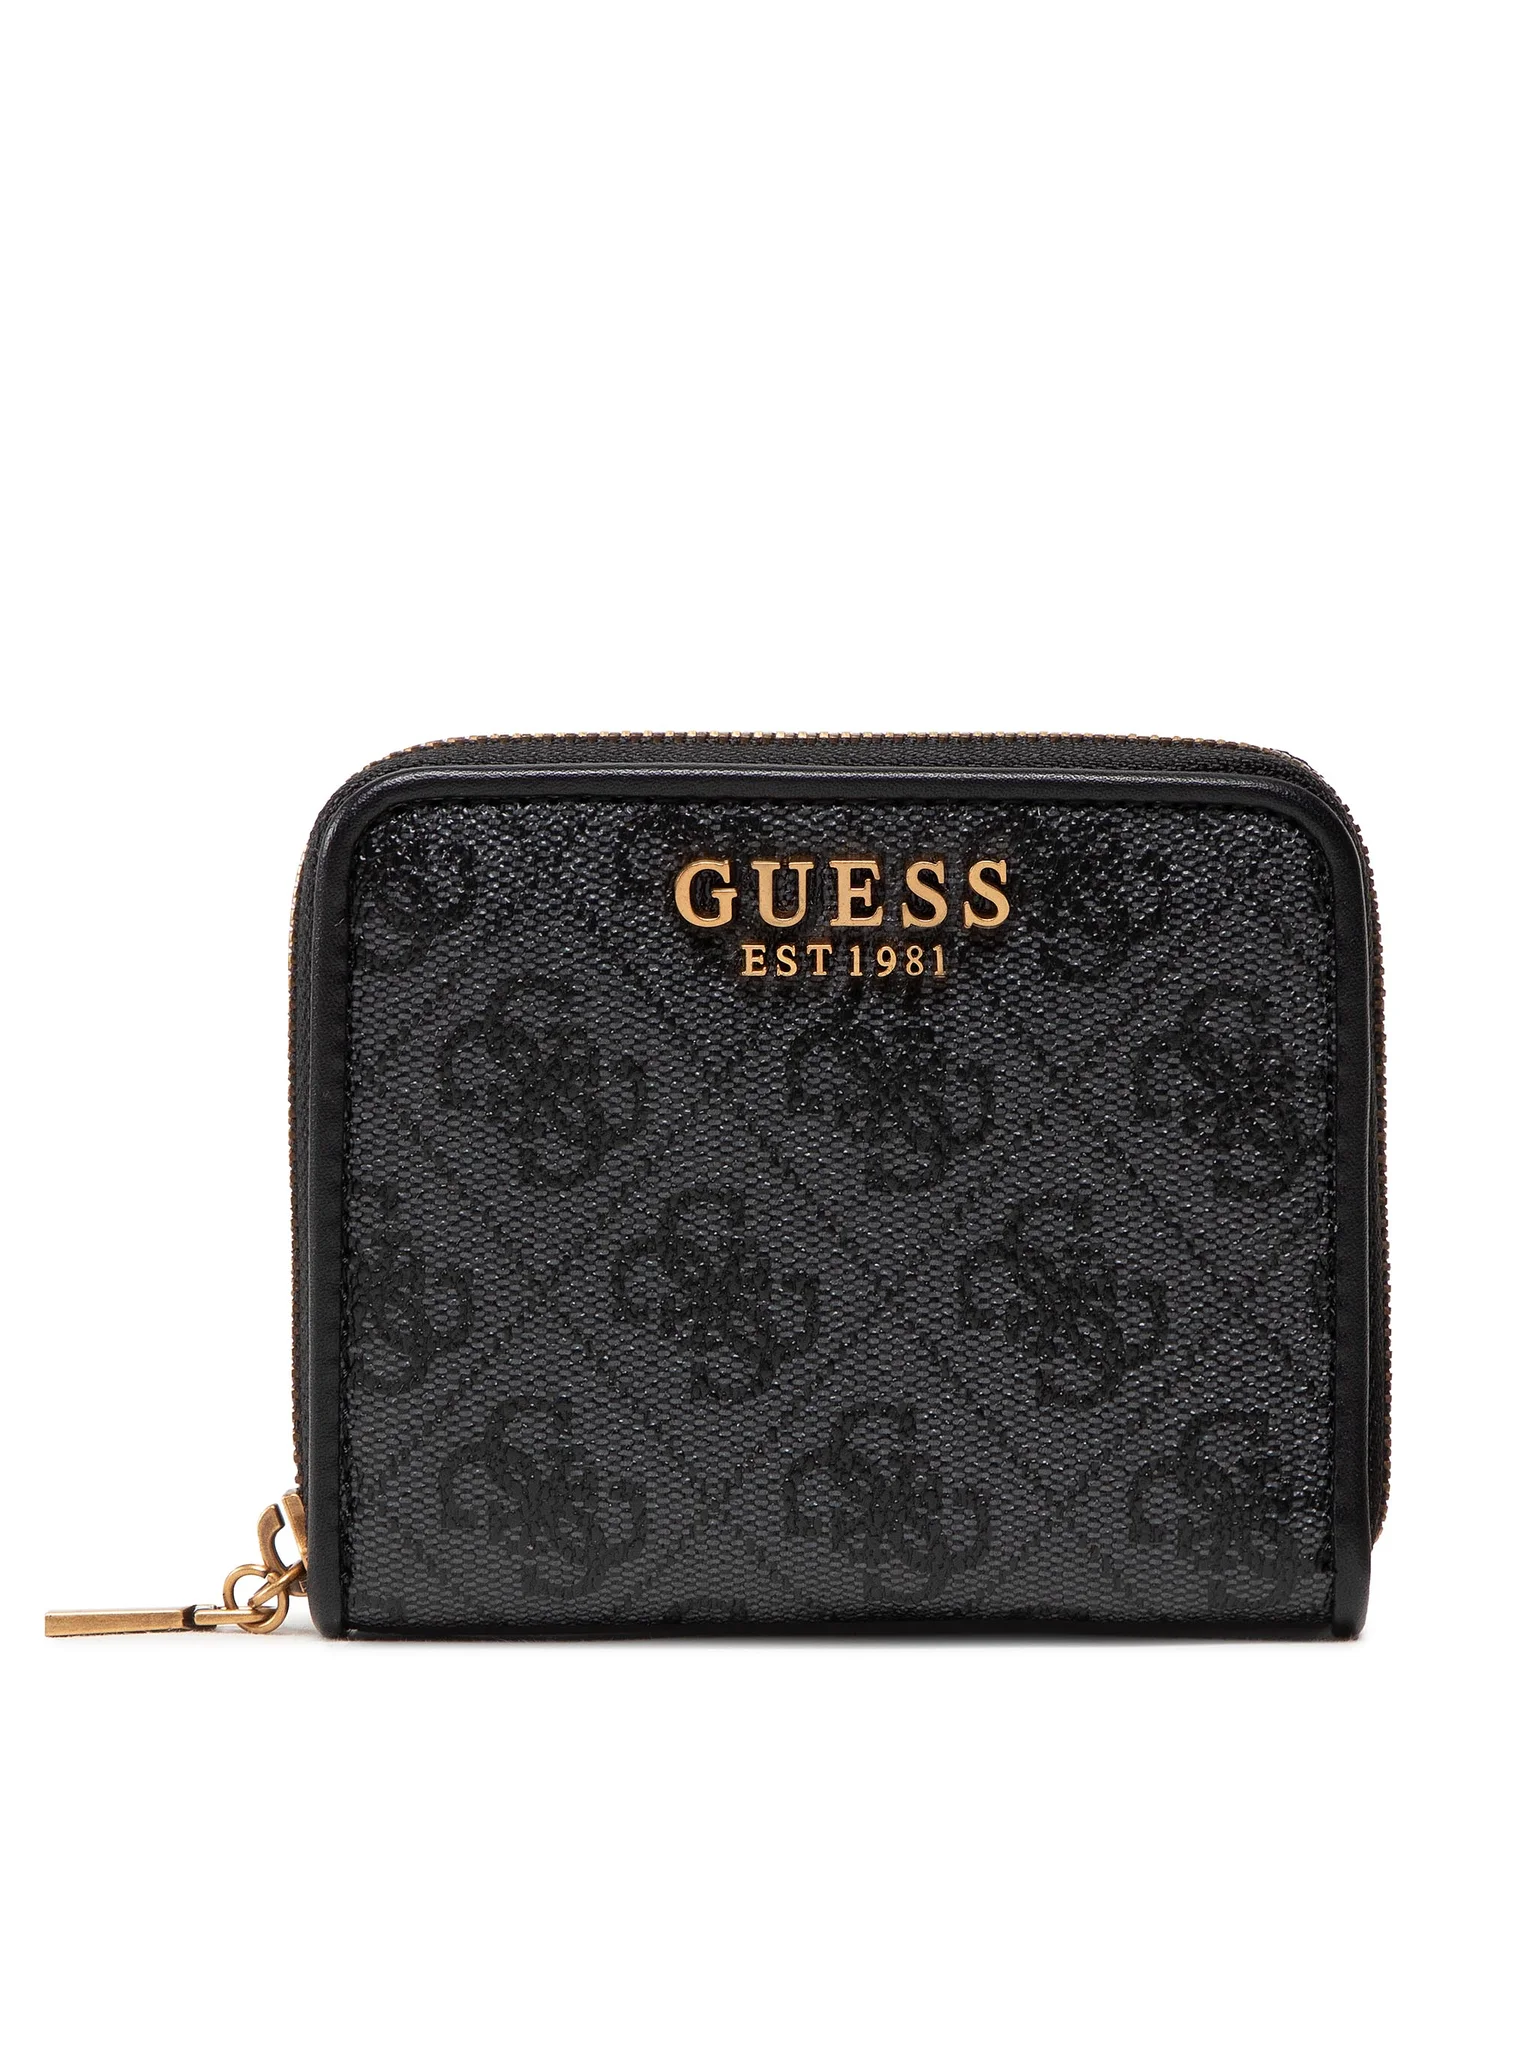 Guess IZZY SLG SMALL ZIP AROUND